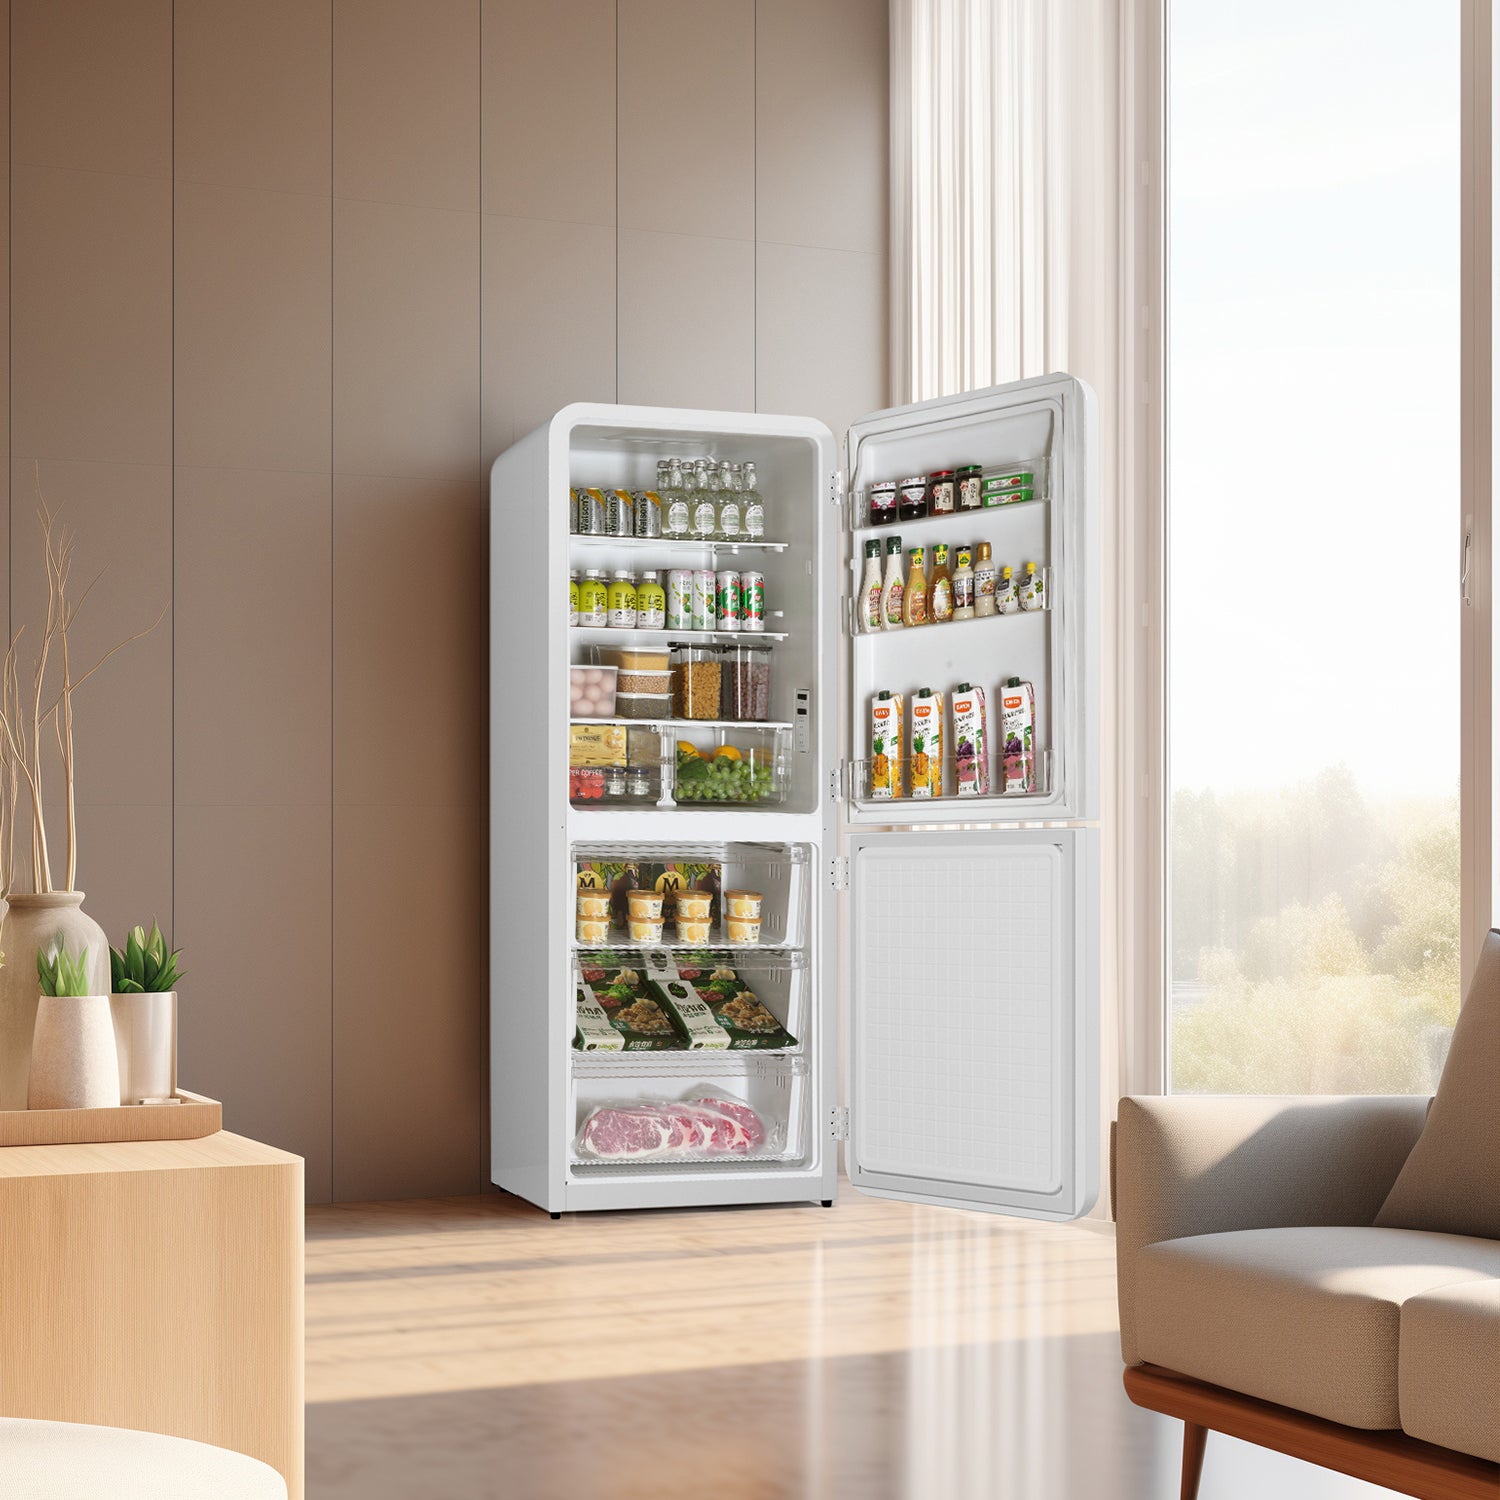 Side view of a retro-style kitchen setting with the 14.1 Cu Ft Bottom Freezer Iconic Retro Fridge positioned beside a glass window overlooking the garden. The fridge door is open, revealing the interior space fully stocked with foods and beverages